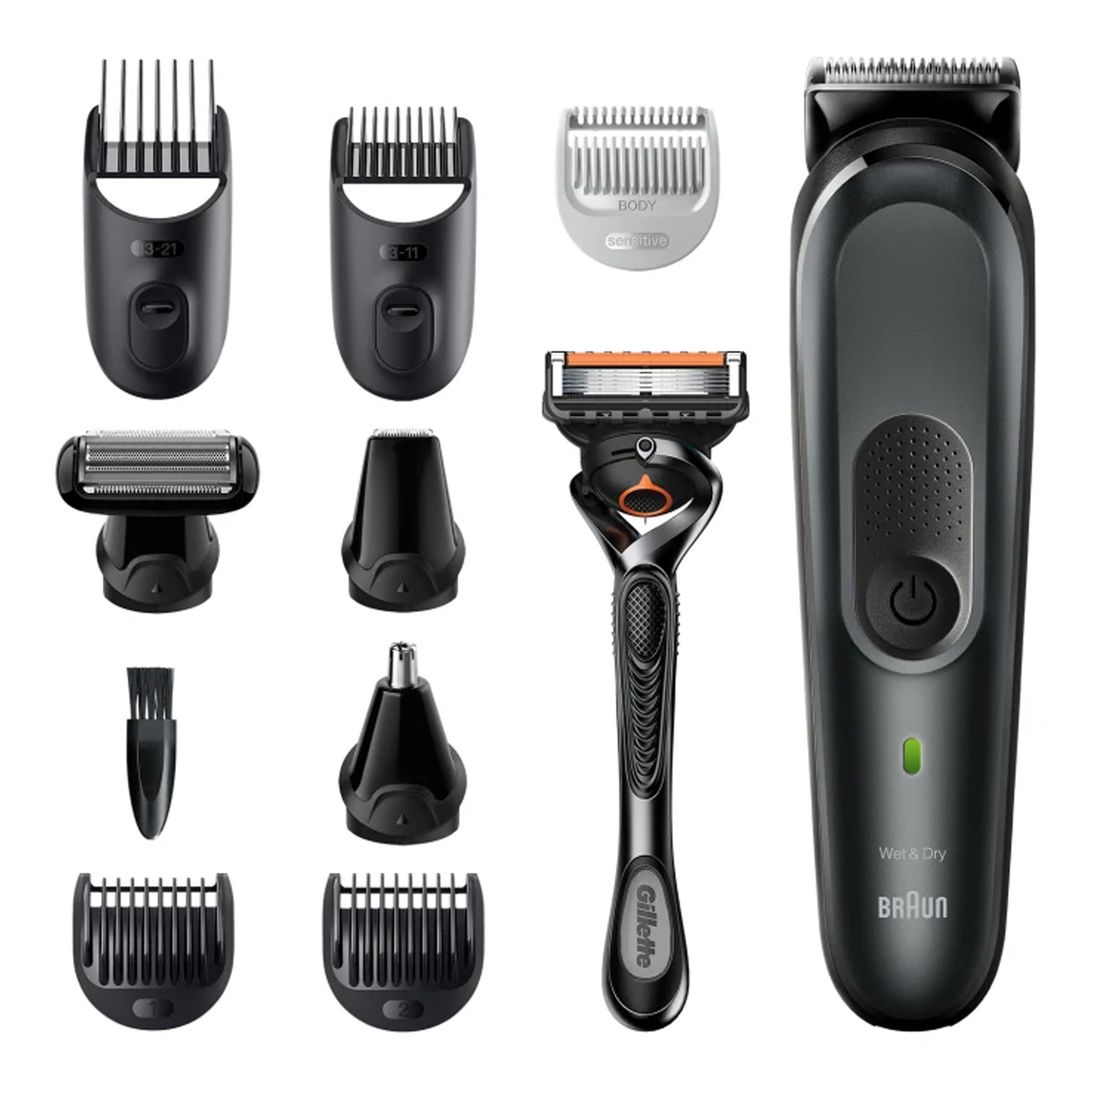 Braun all-in-one trimmer MGK7331 10-in-1 trimmer With 8 attachments and Gillette ProGlide razor